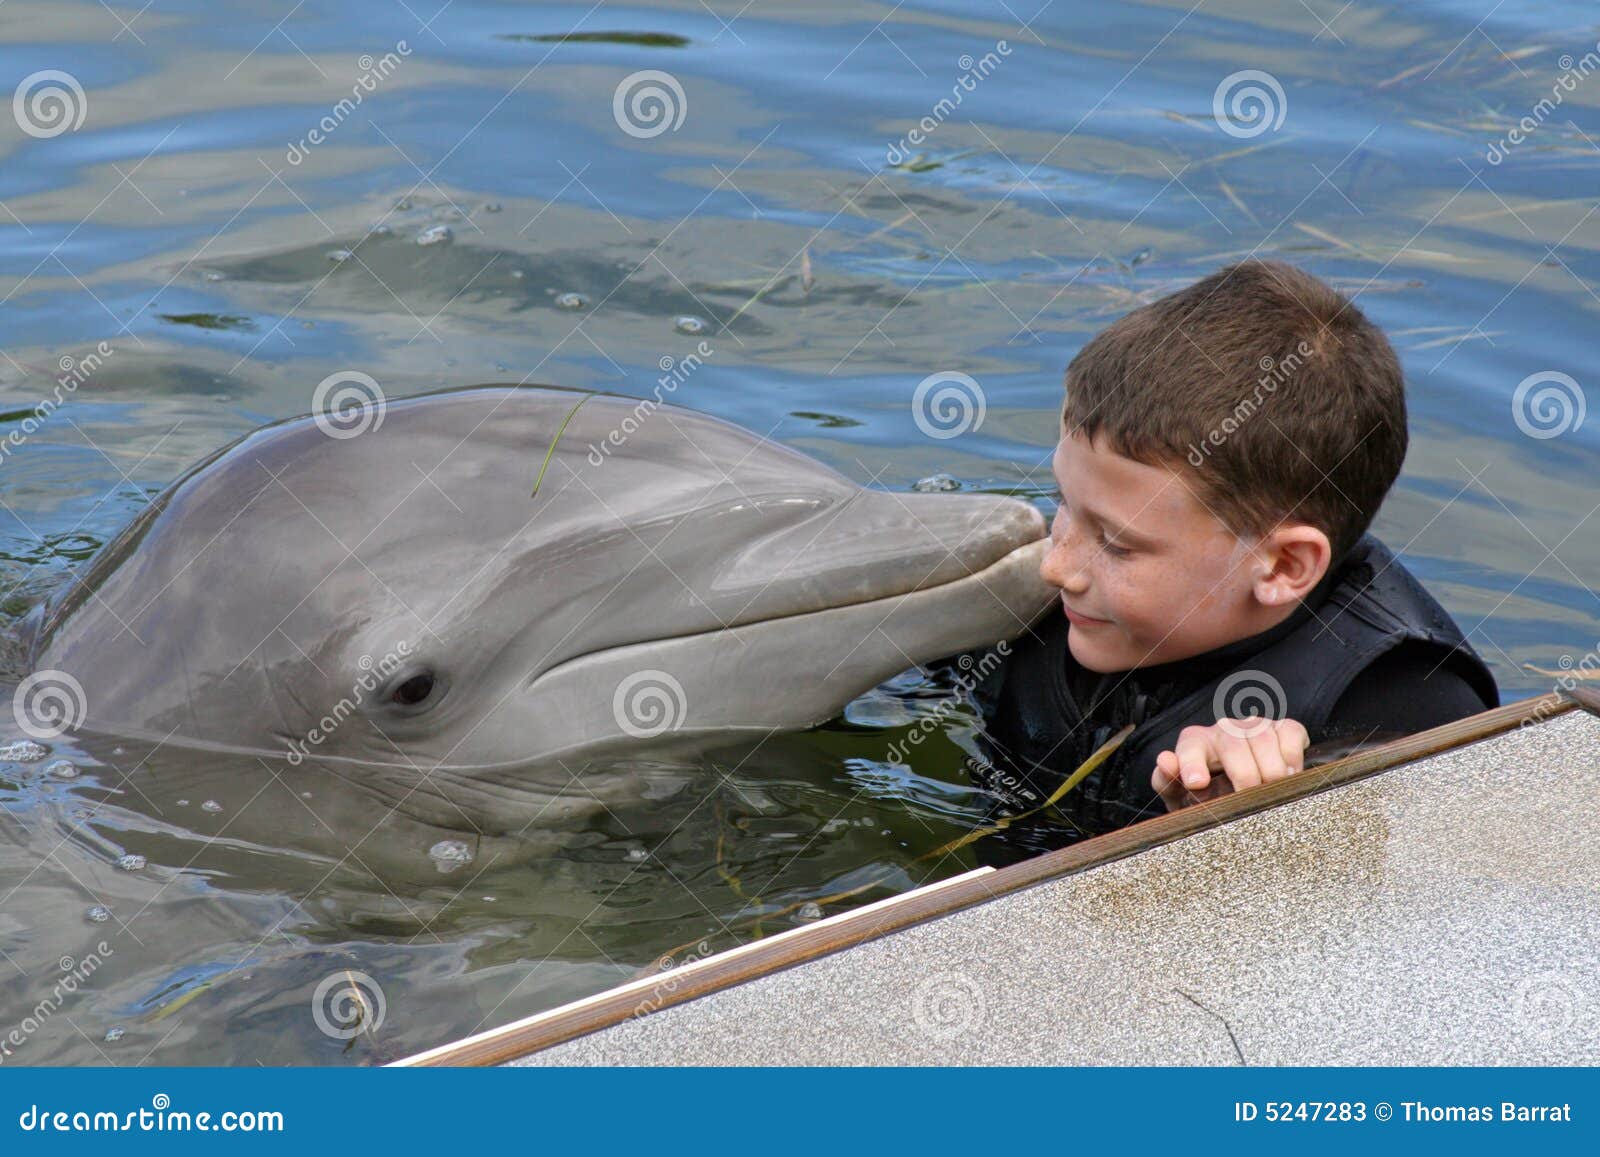 innocent young boy with a dolphin